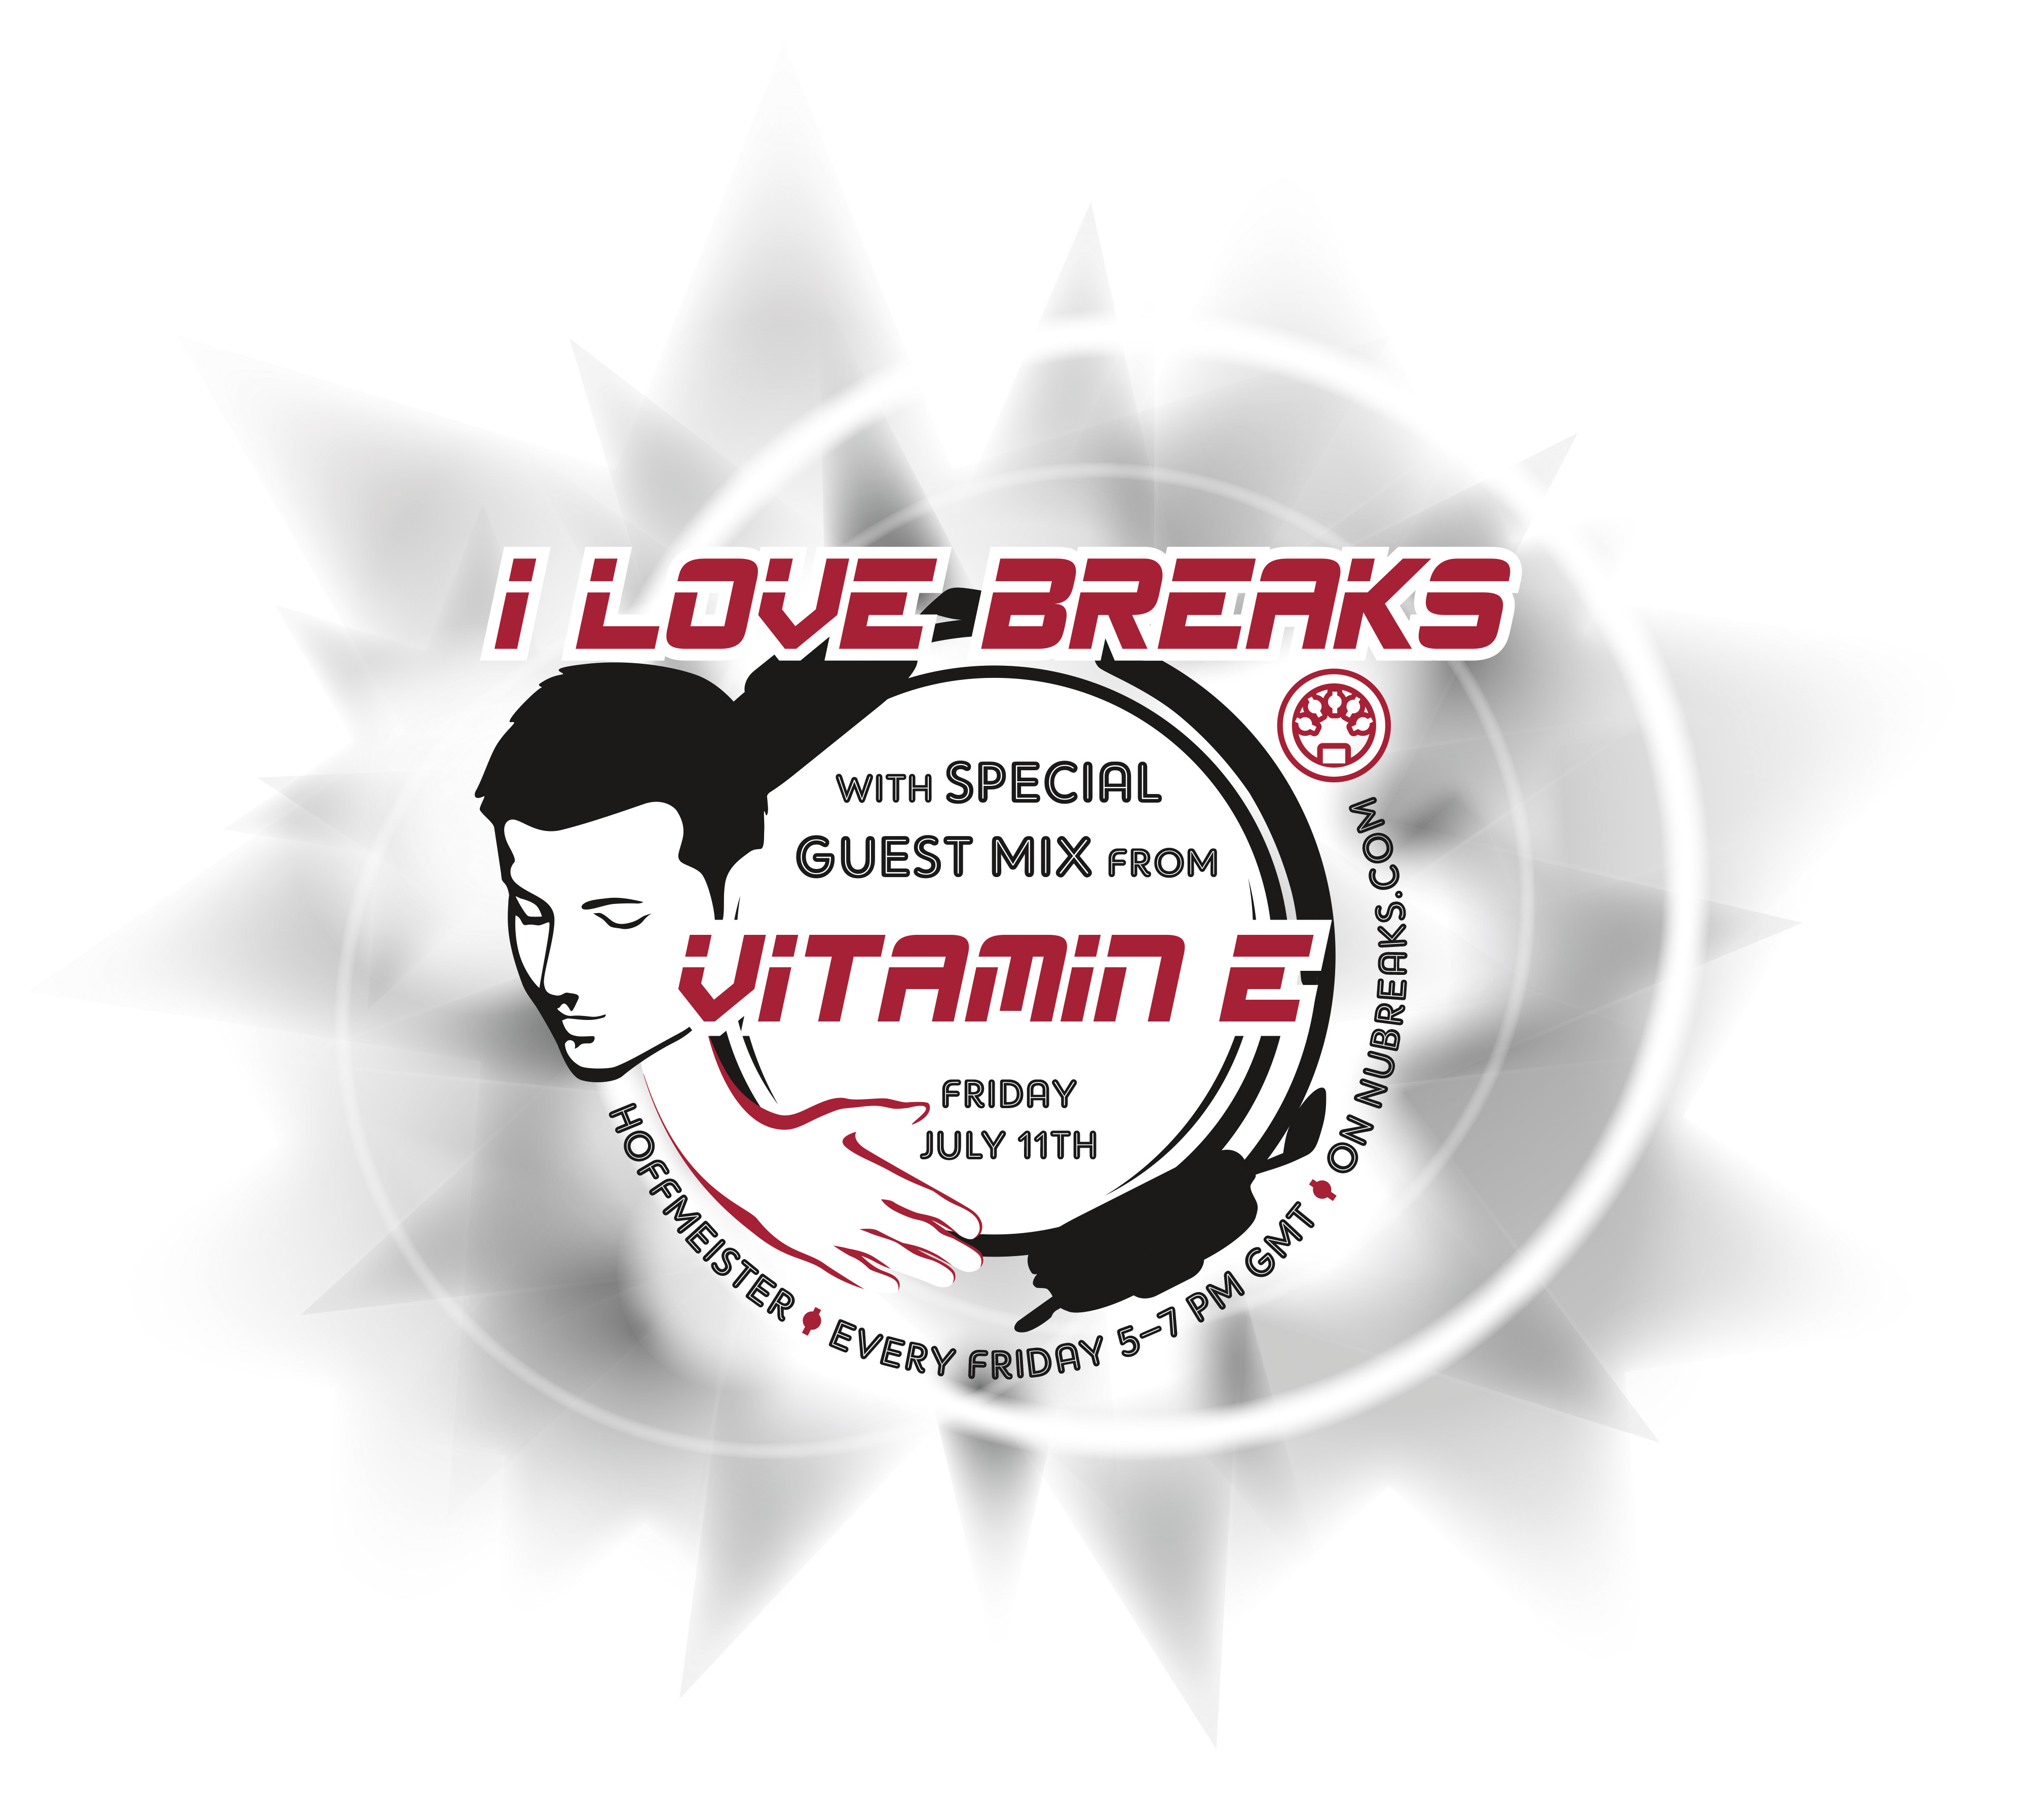 I Love Breaks with guest mix from Vitamin E